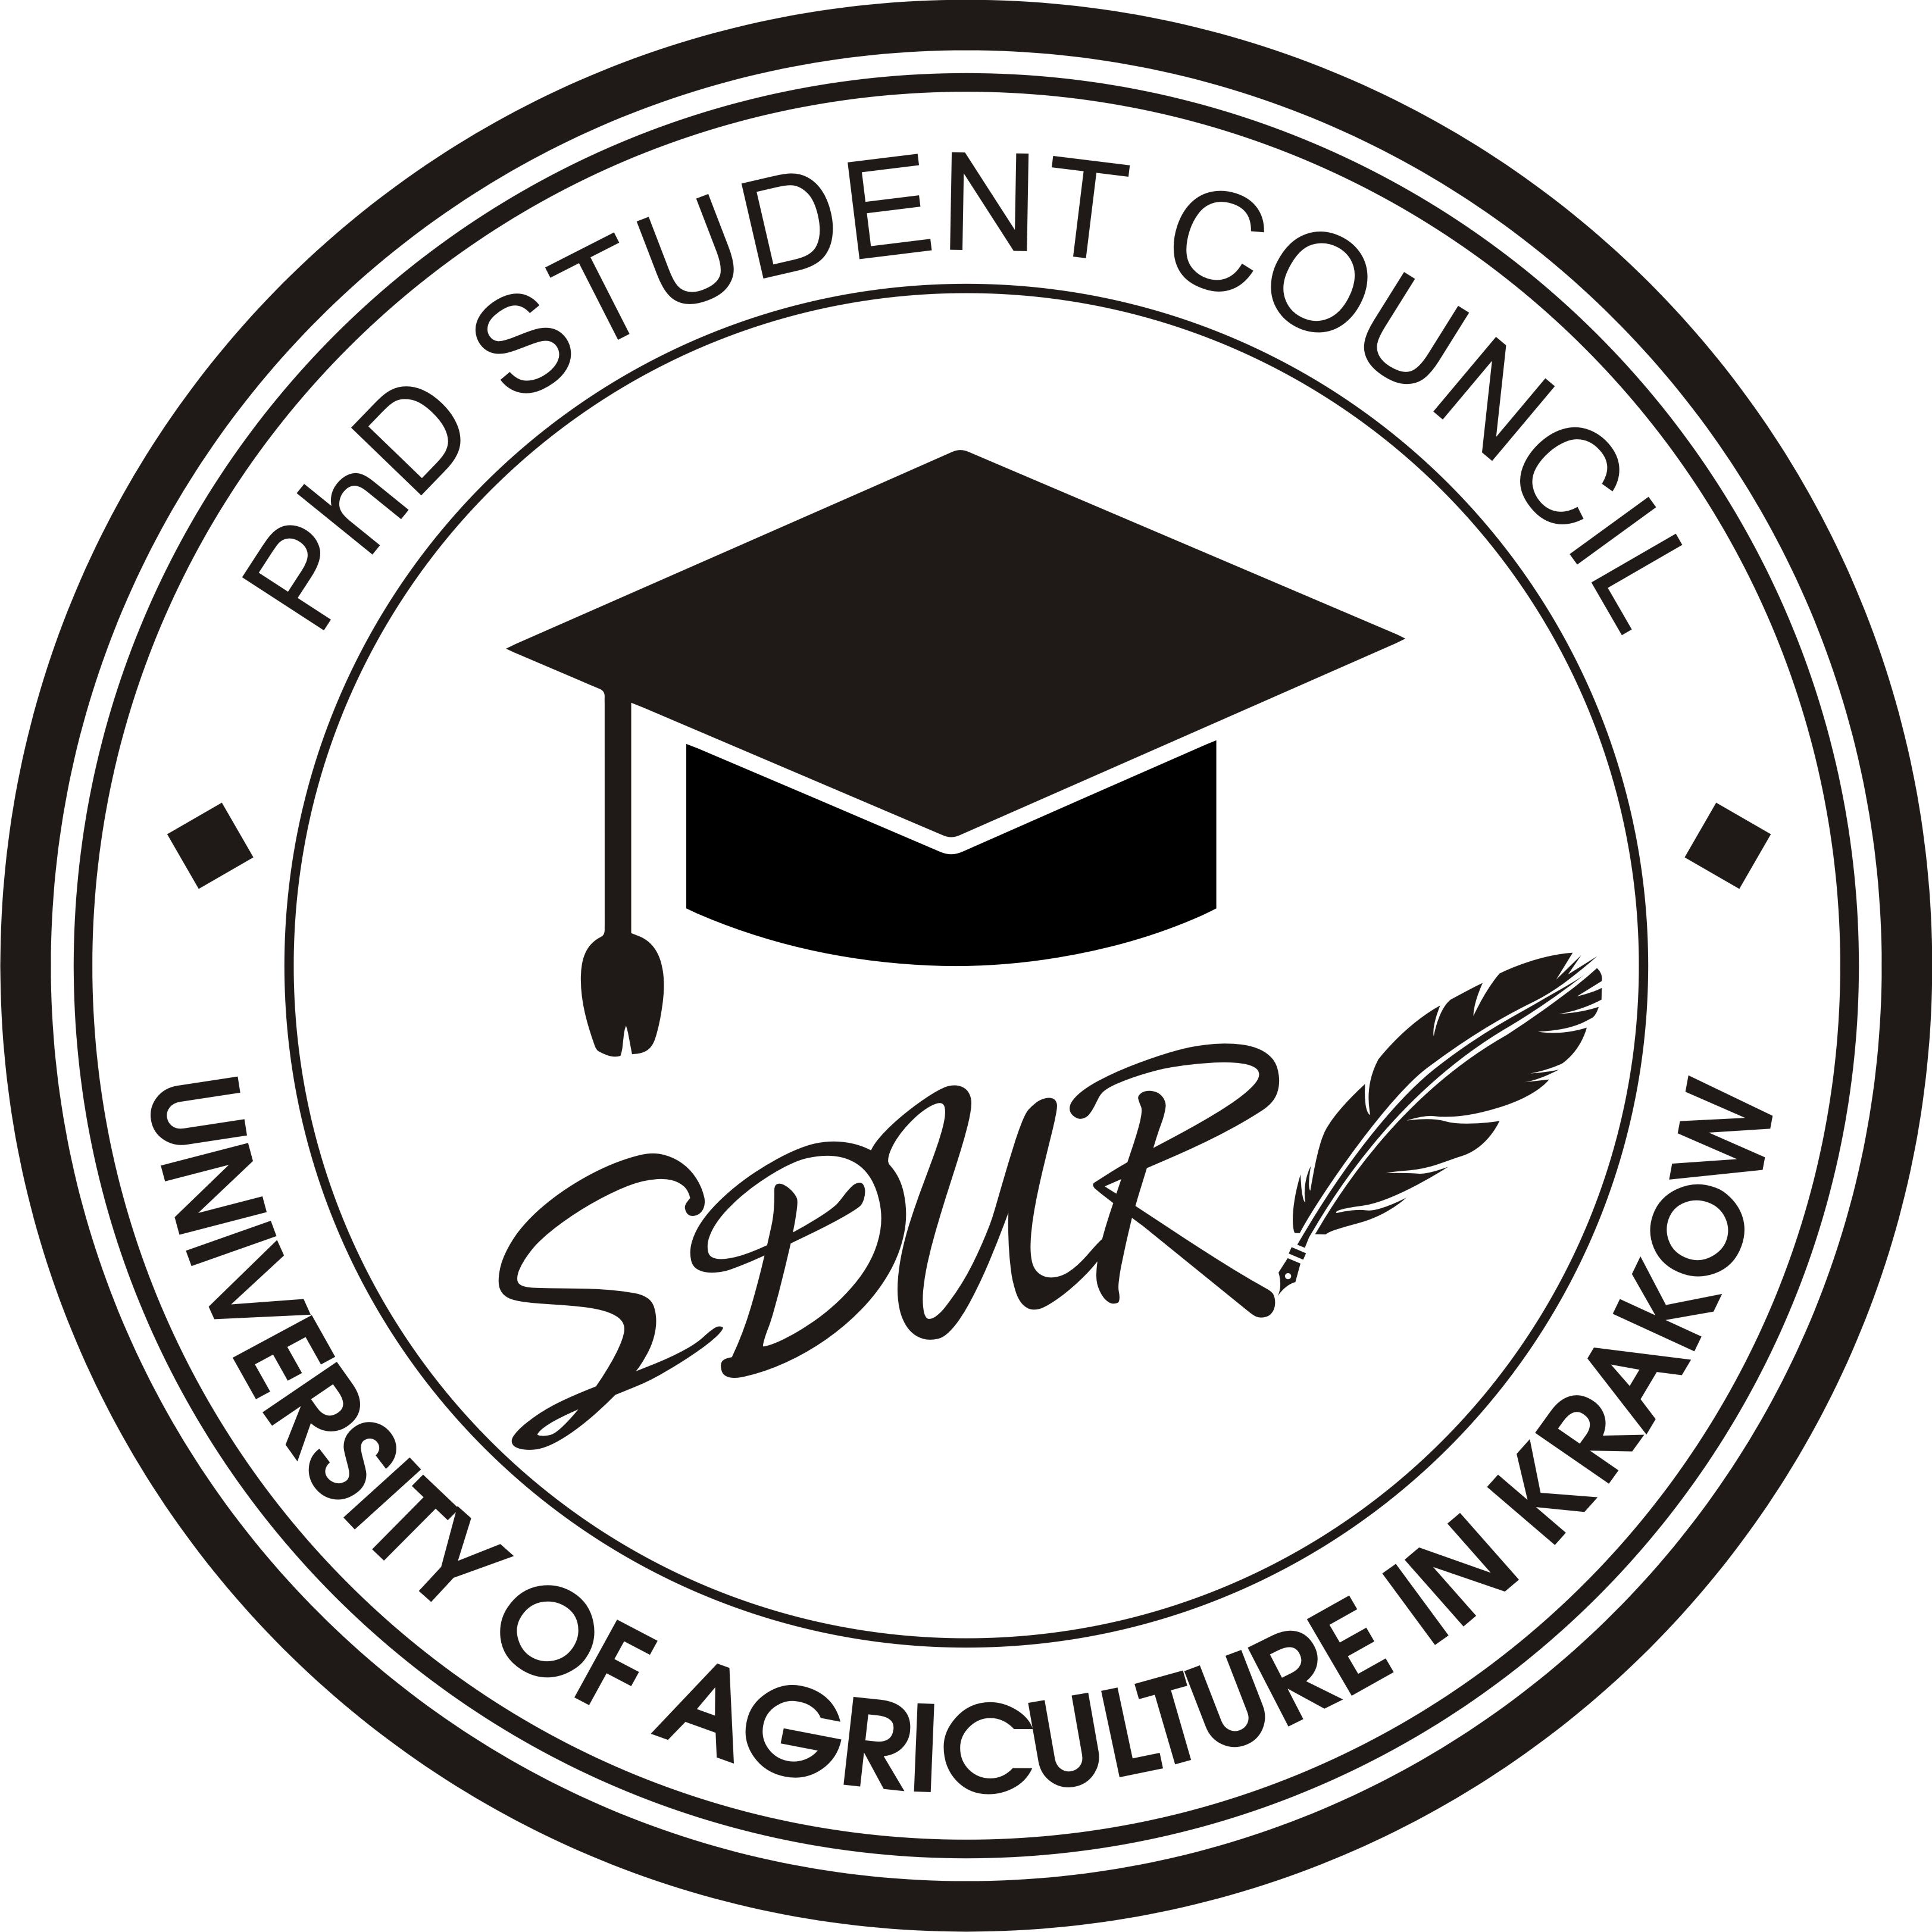 PhD Student Council